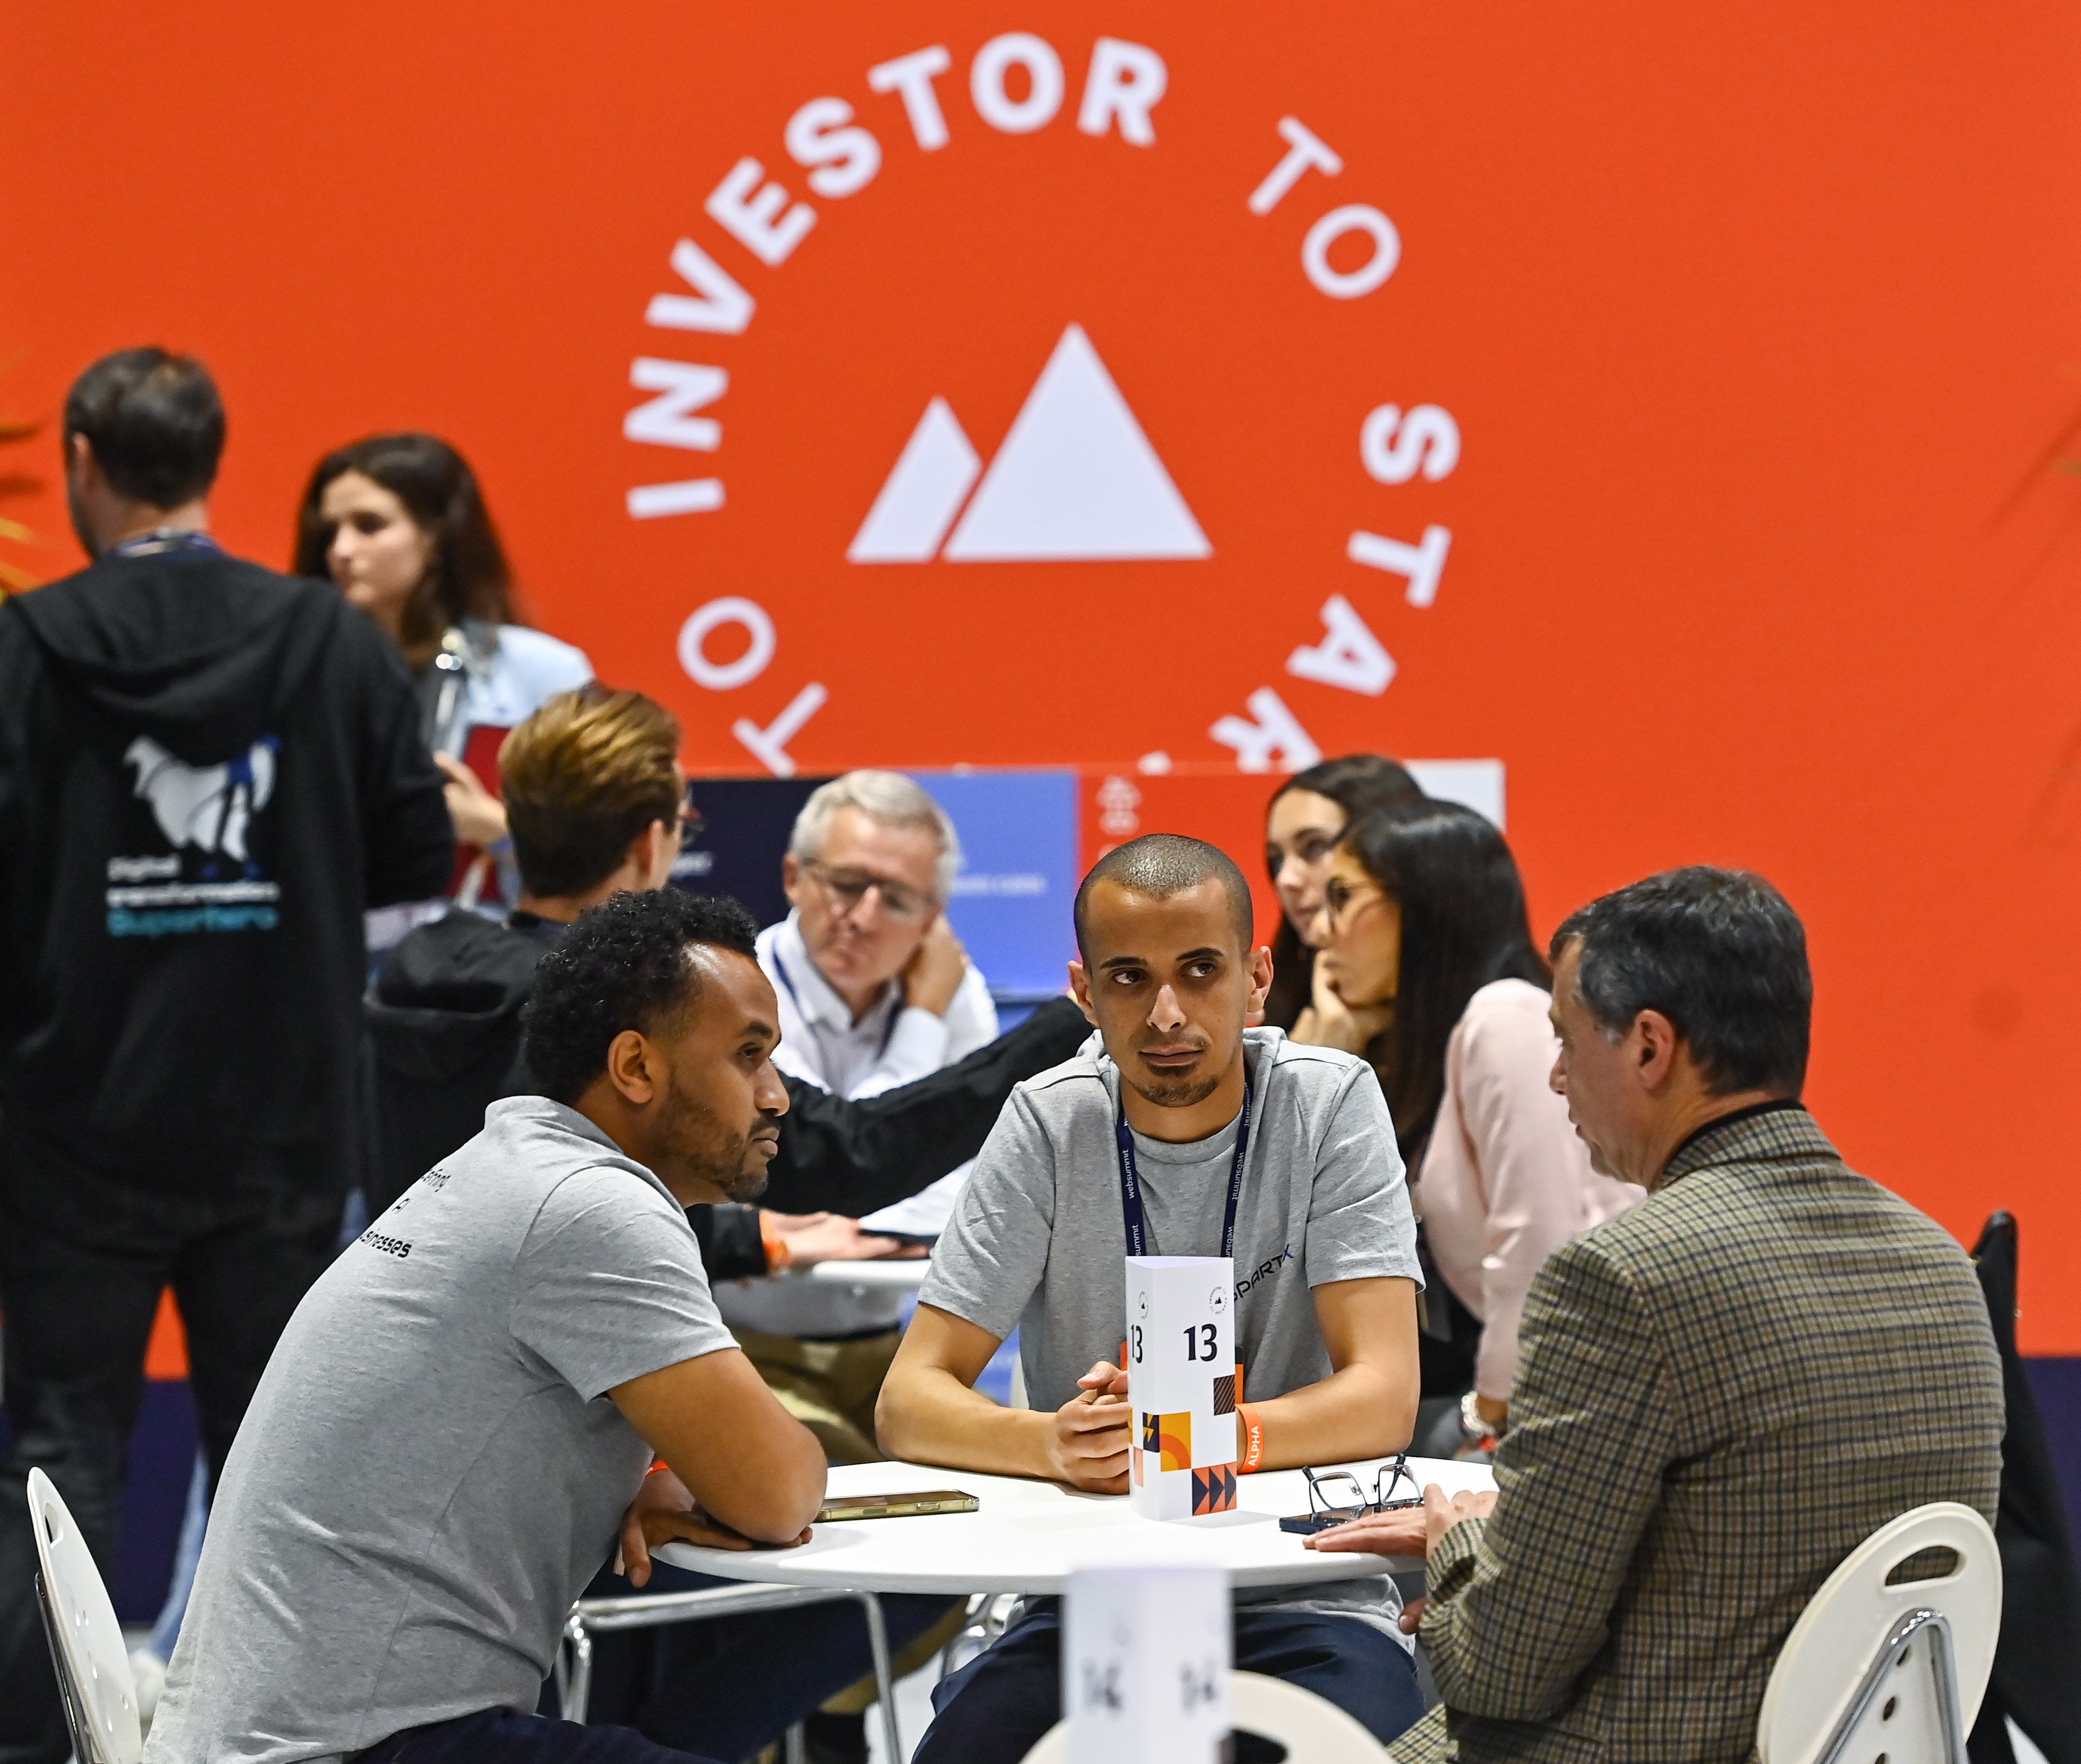 Investor to startup meetings during day one of Web Summit 2022 at the Altice Arena in Lisbon, Portugal.